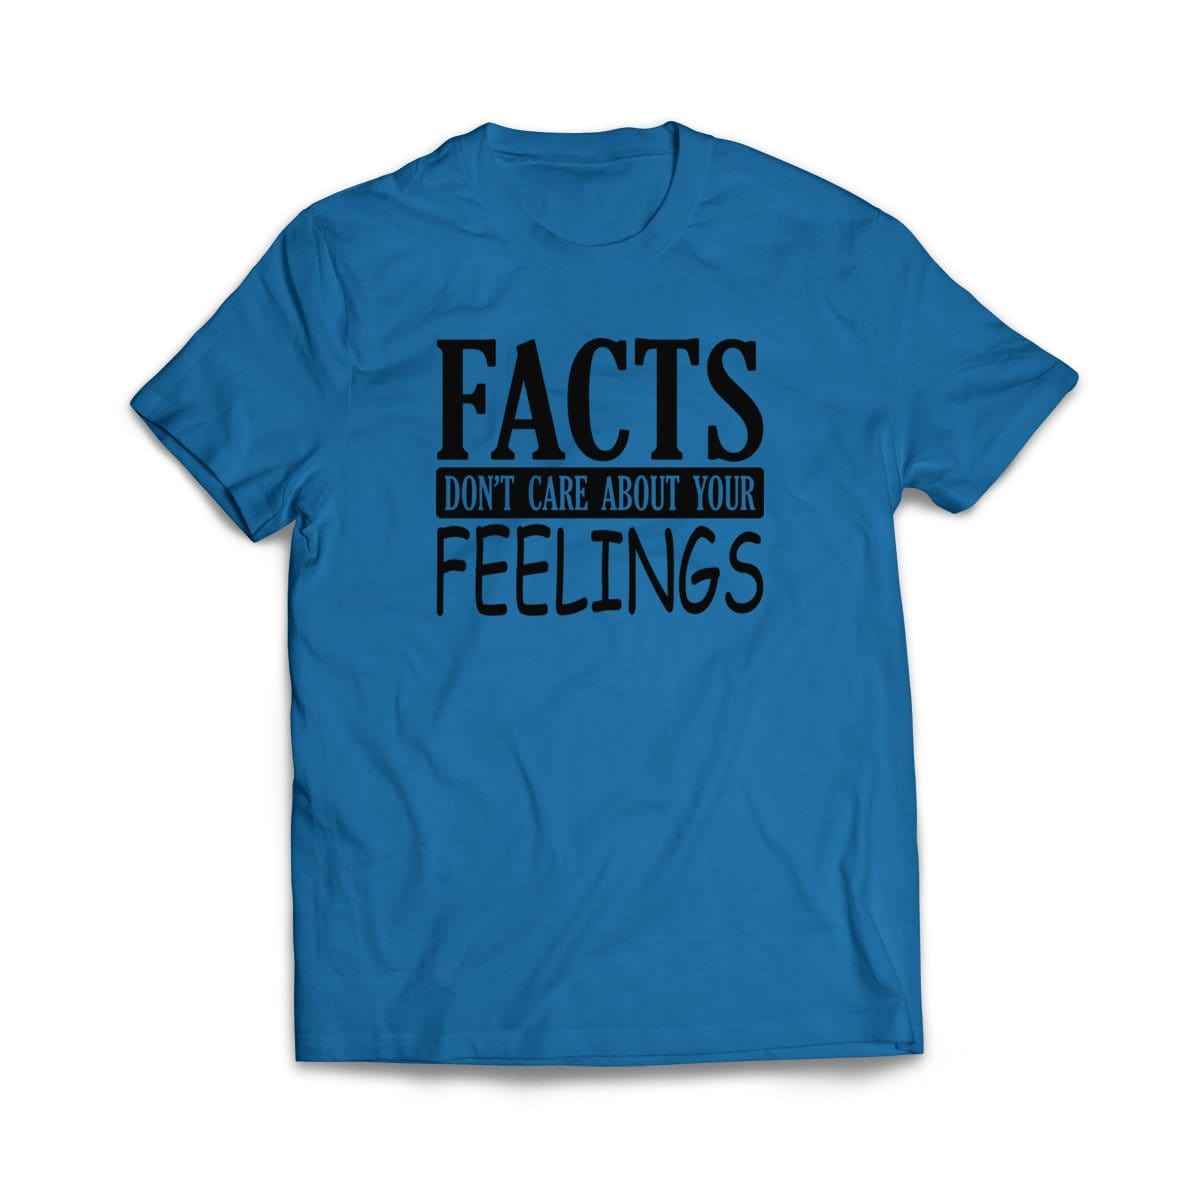 "Facts Don't care About Your Feelings" Royal T-Shirt - We Got Teez